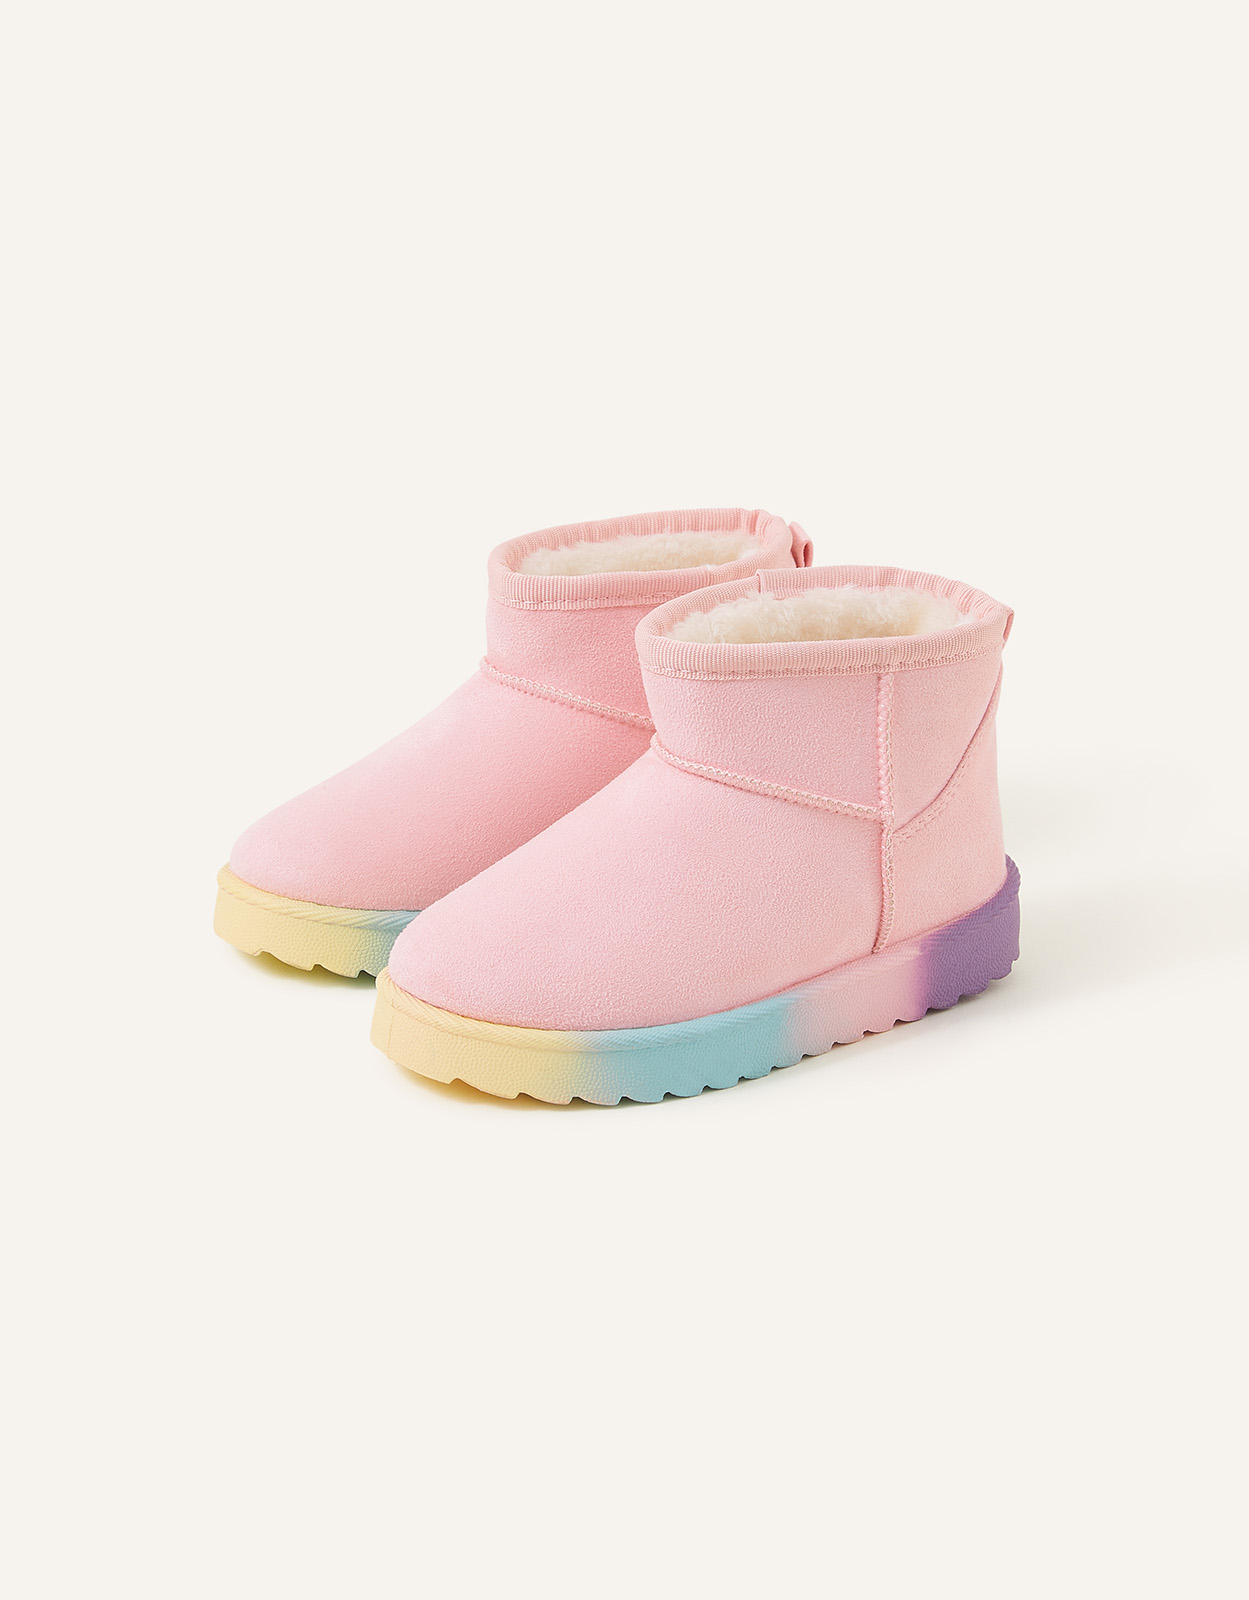 Accessorize Girl's Rainbow Sole Faux Suede Boots Pink, Size: 9